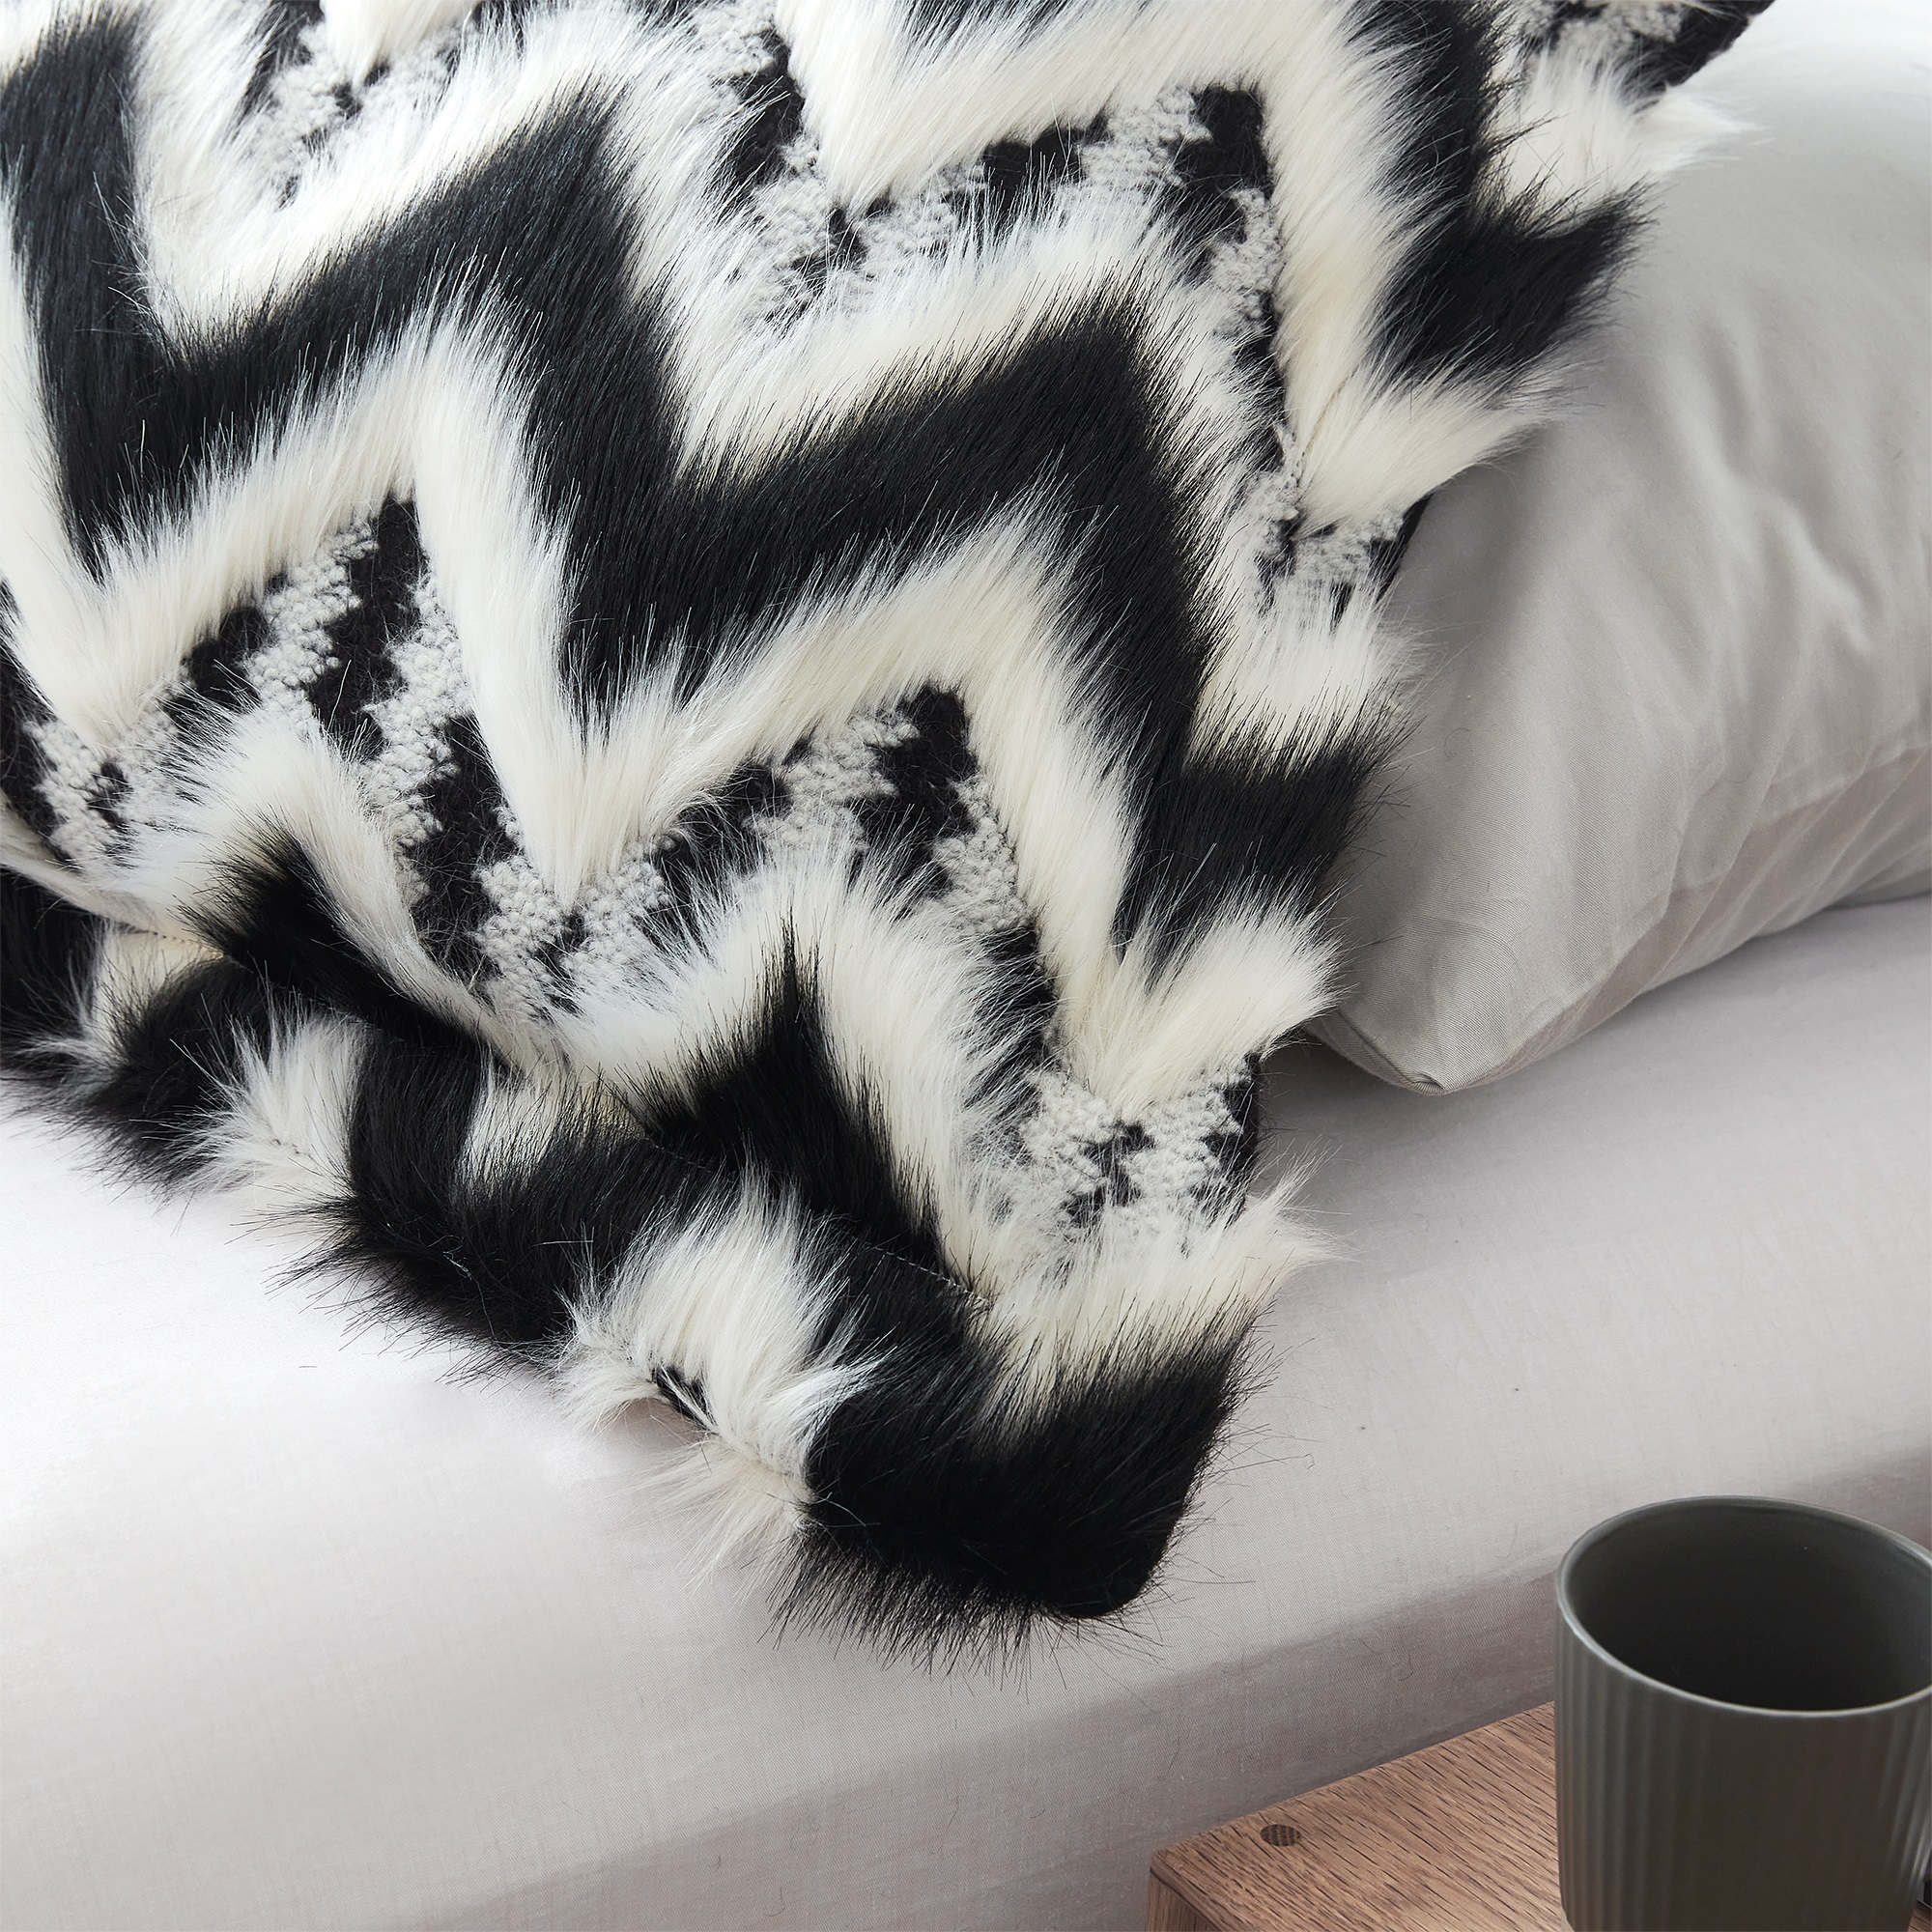 Fancy Meeting You Here - Coma Inducer Oversized Comforter with Black Reverse